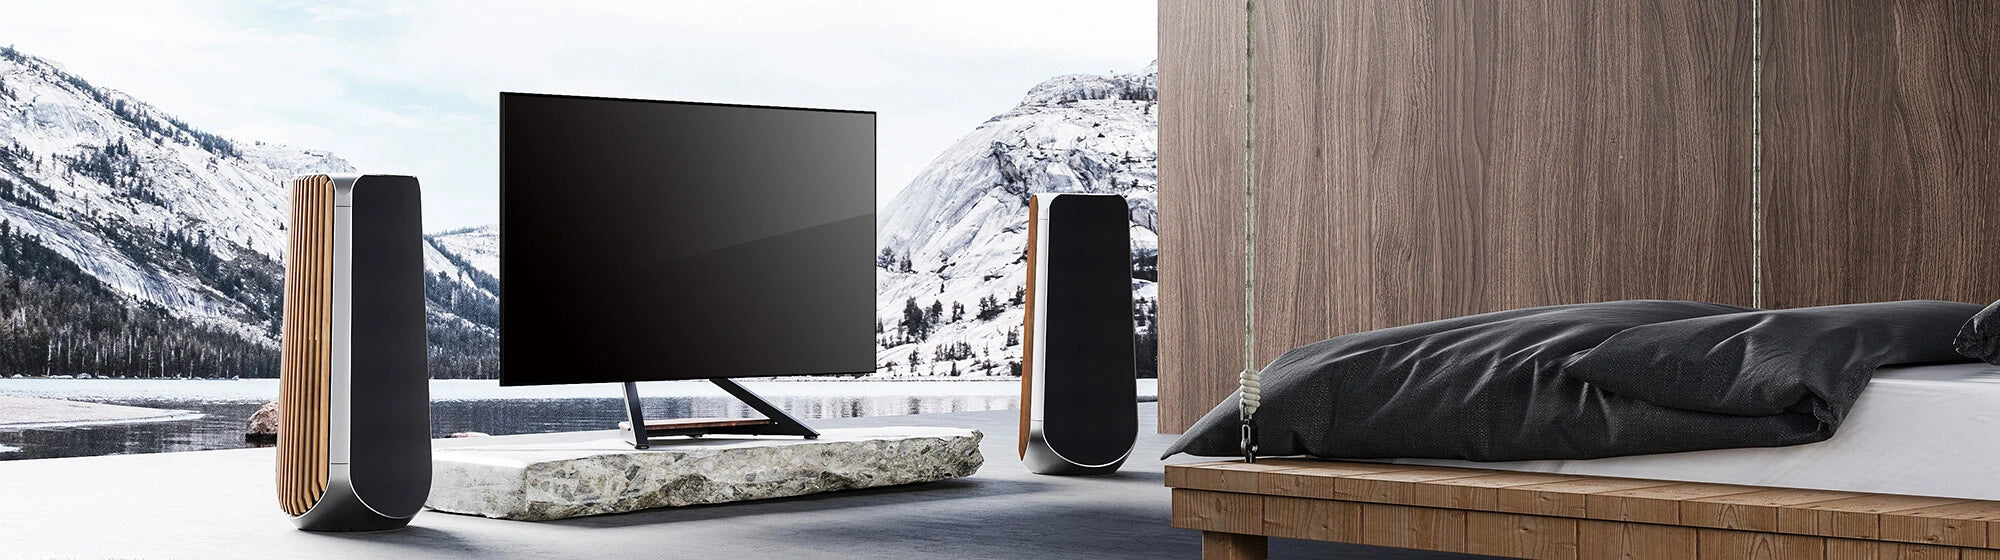 FITUEYES Tabletop TV Stands